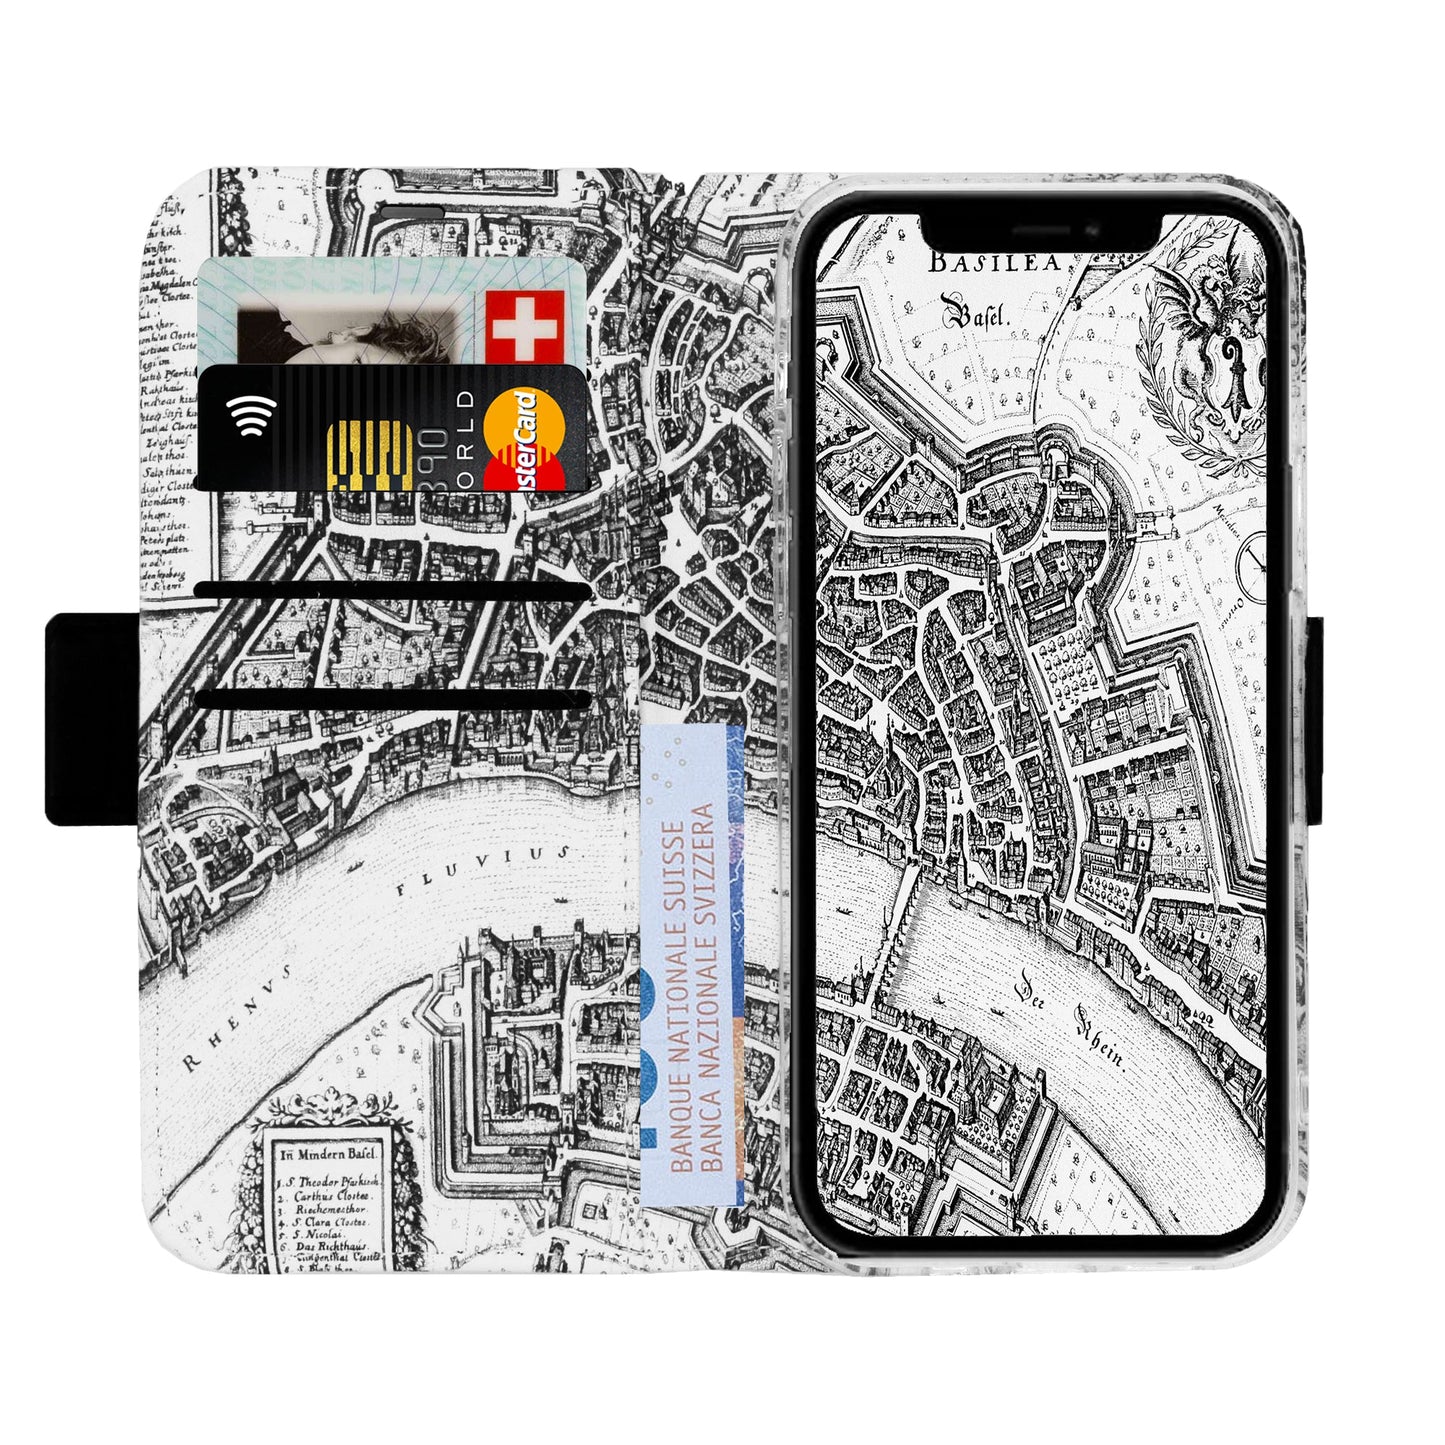 Basel Merian Victor Case for iPhone 11 Pro